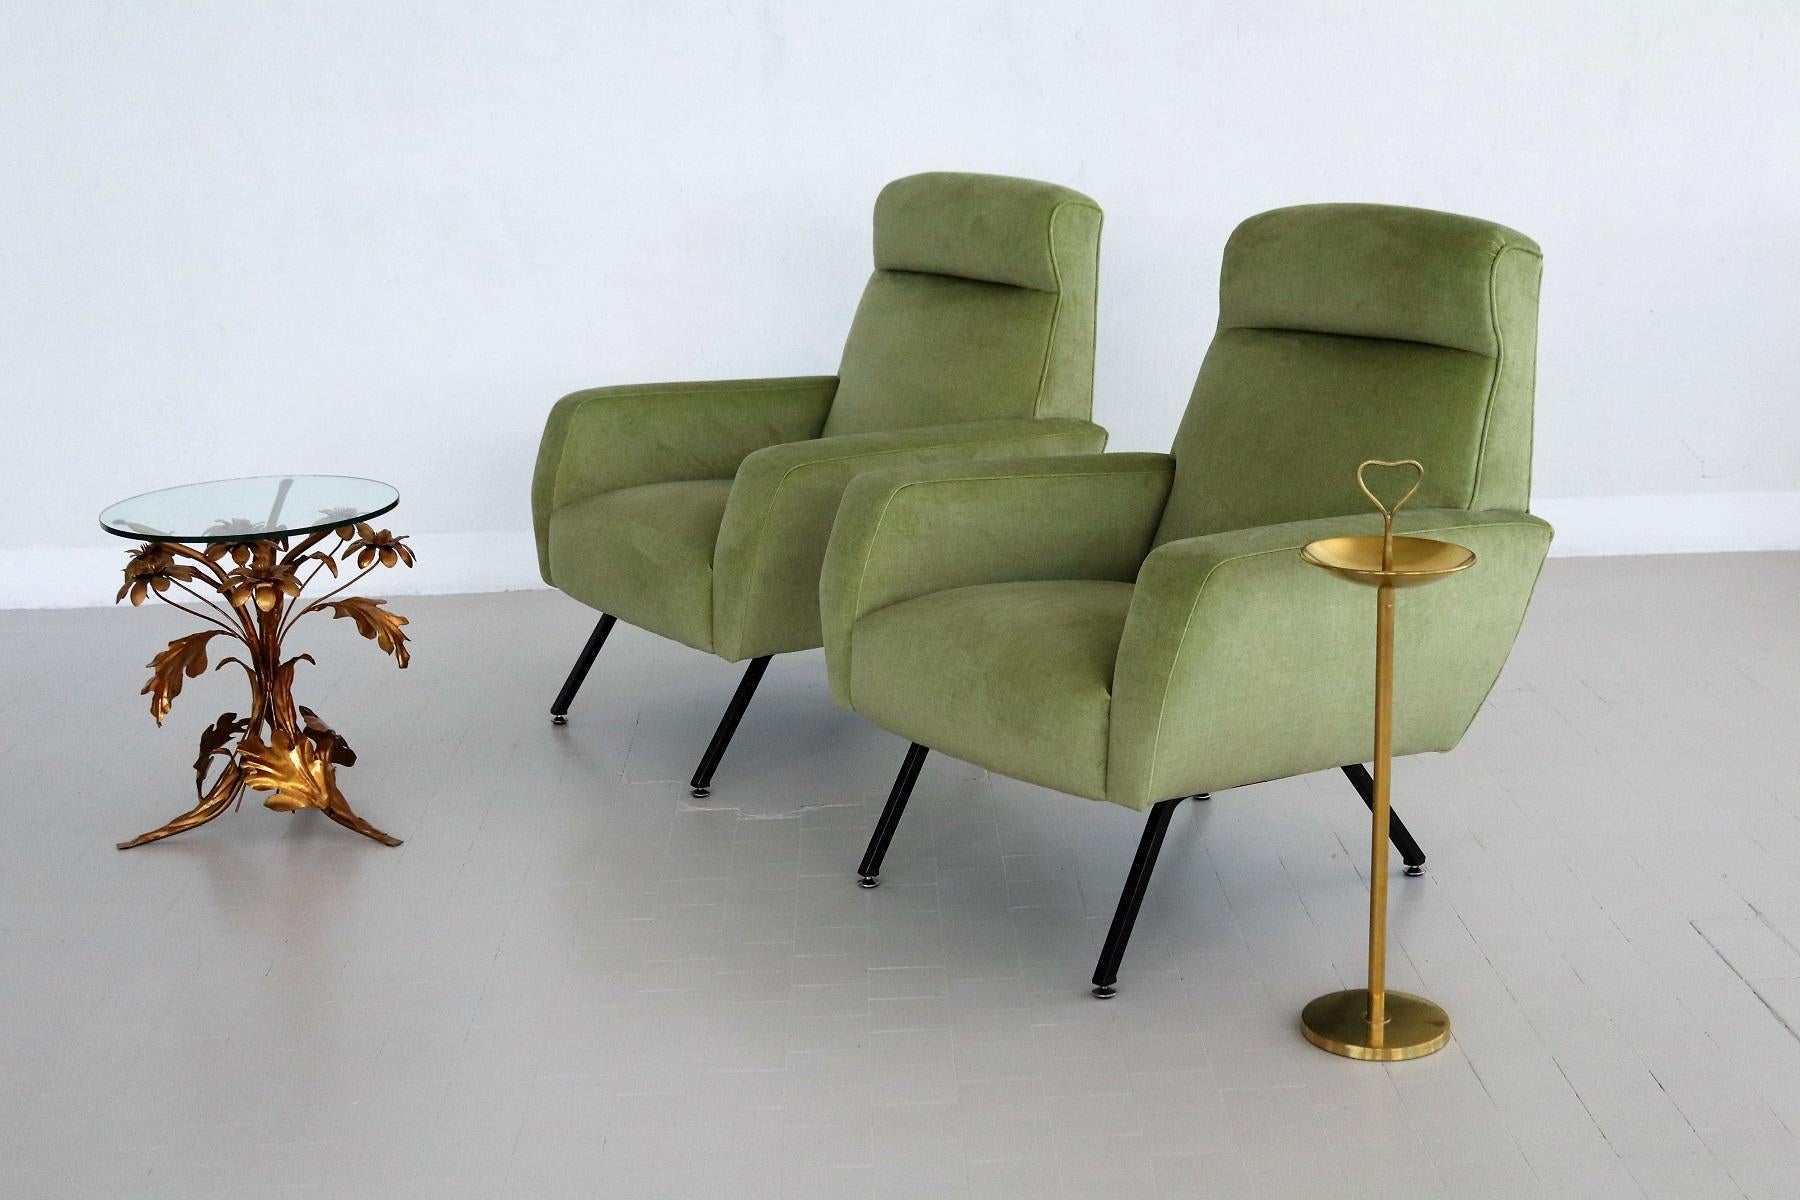 Italian Midcentury Armchairs Re-Upholstered in Green Velvet, 1960s In Good Condition For Sale In Morazzone, Varese